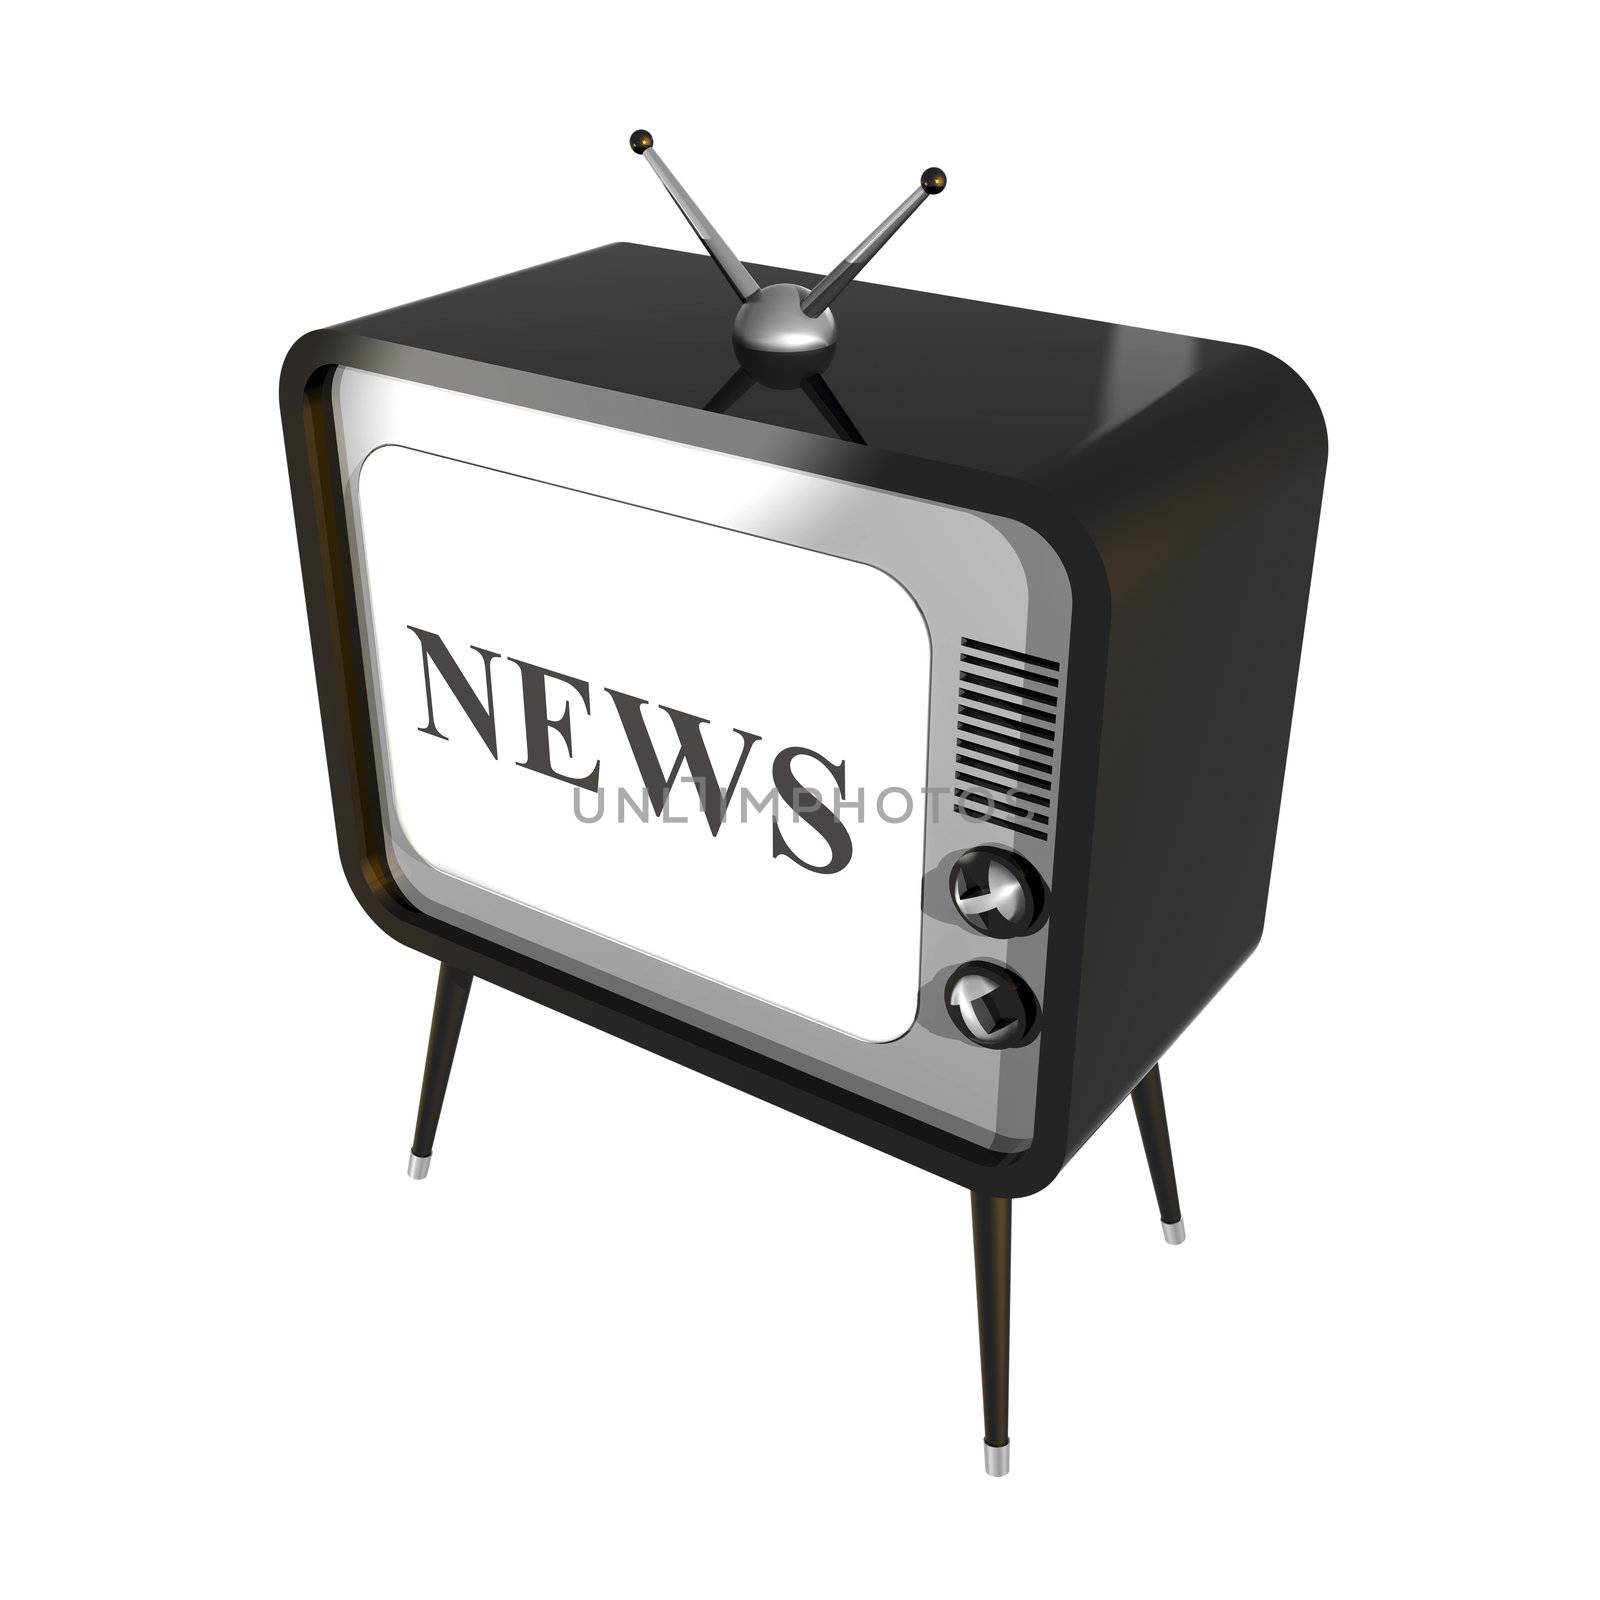 News on TV by magraphics